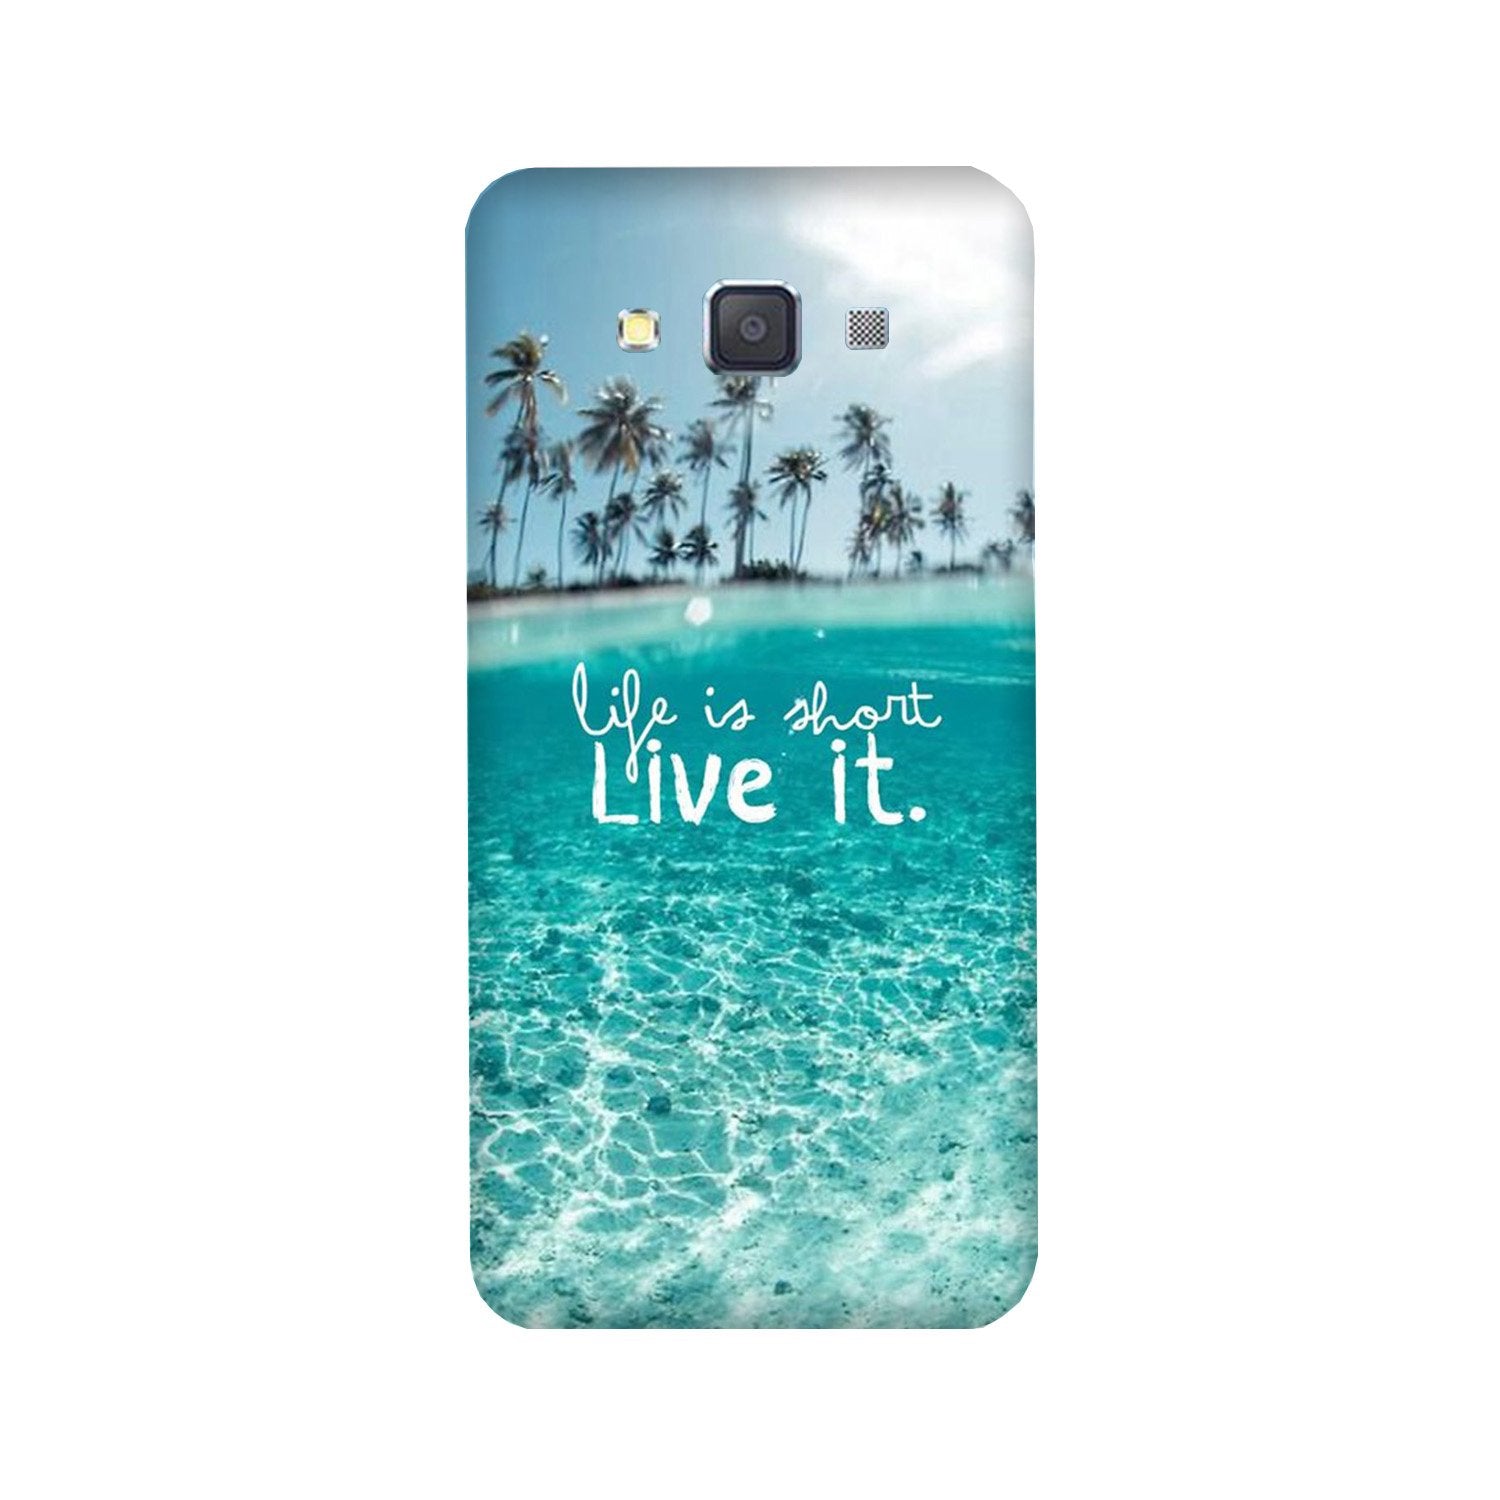 Life is short live it Case for Galaxy Grand Max